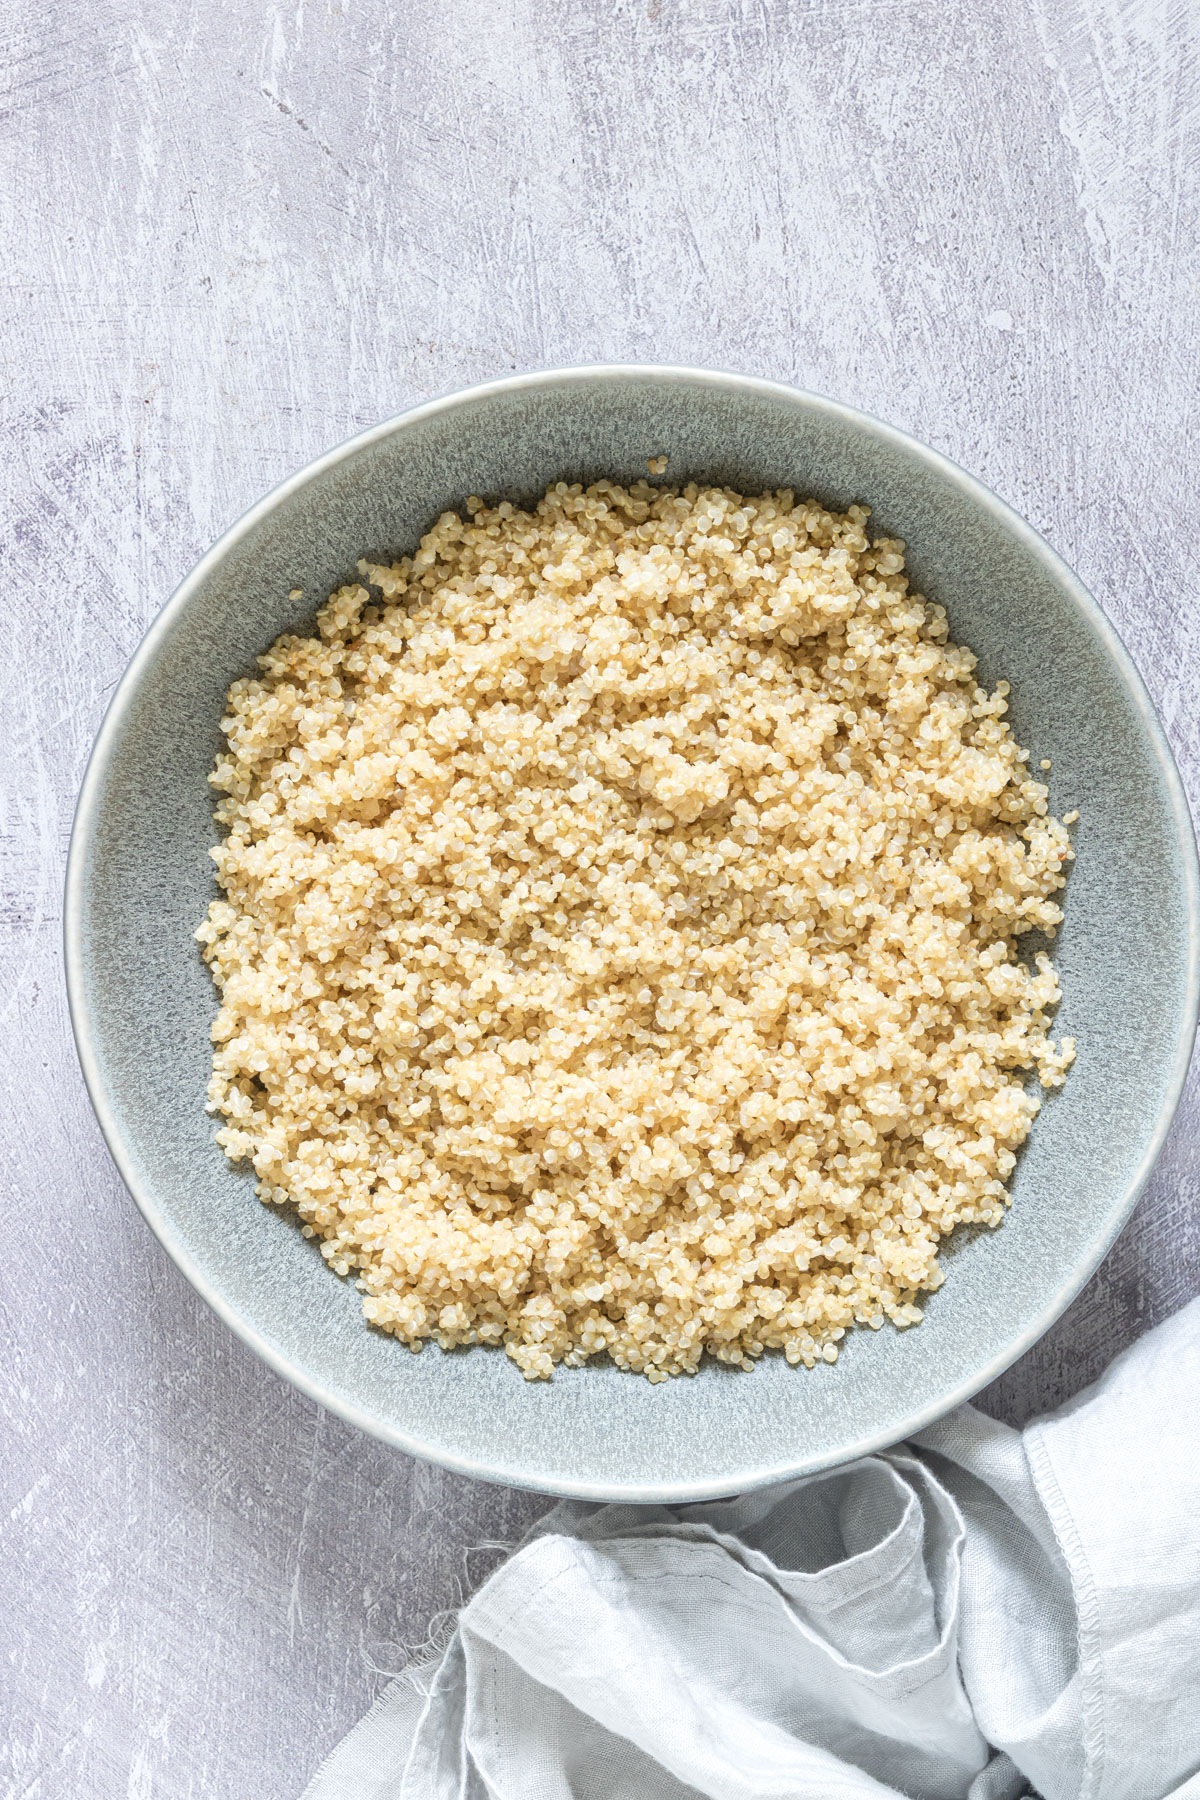 How To Cook Quinoa (Stovetop, Instant Pot, Rice Cooker)